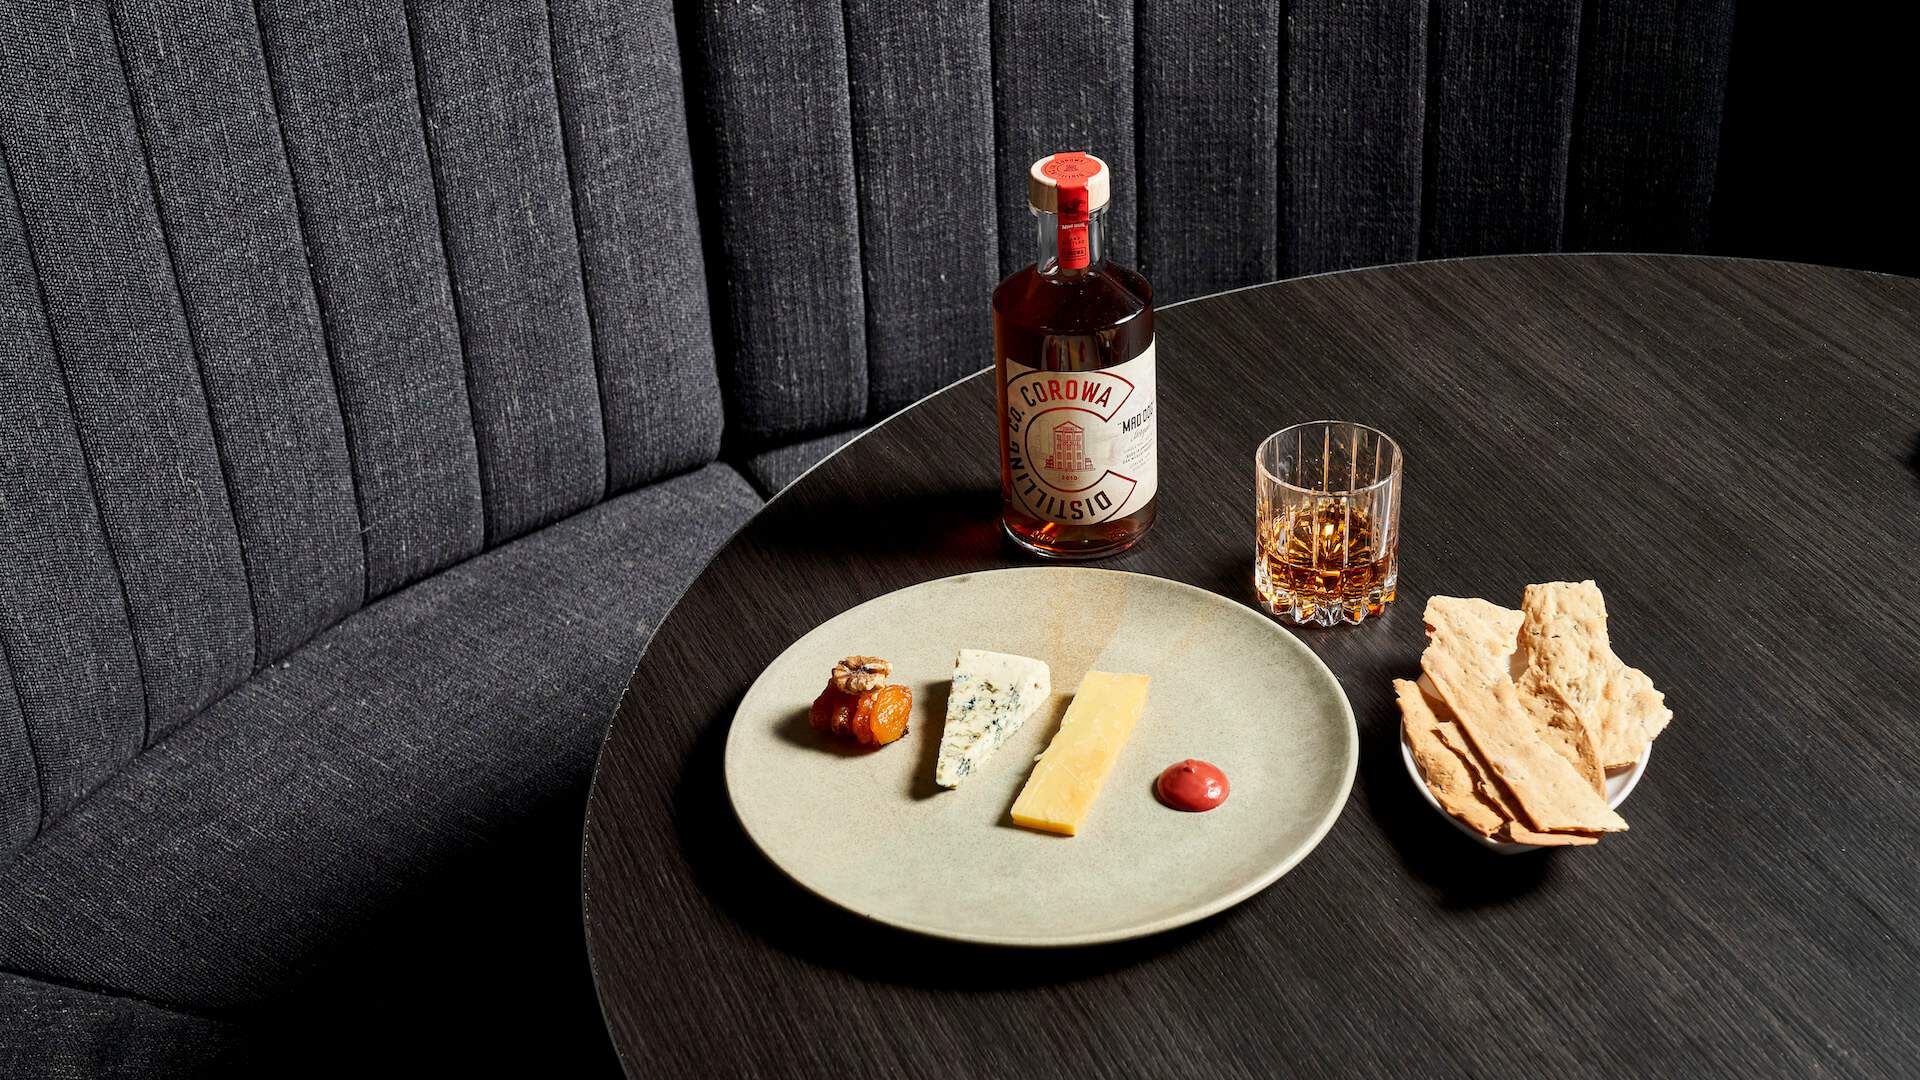 Whisky and cheese plate at Archer's at Marriott Docklands for the Whisky dinner series